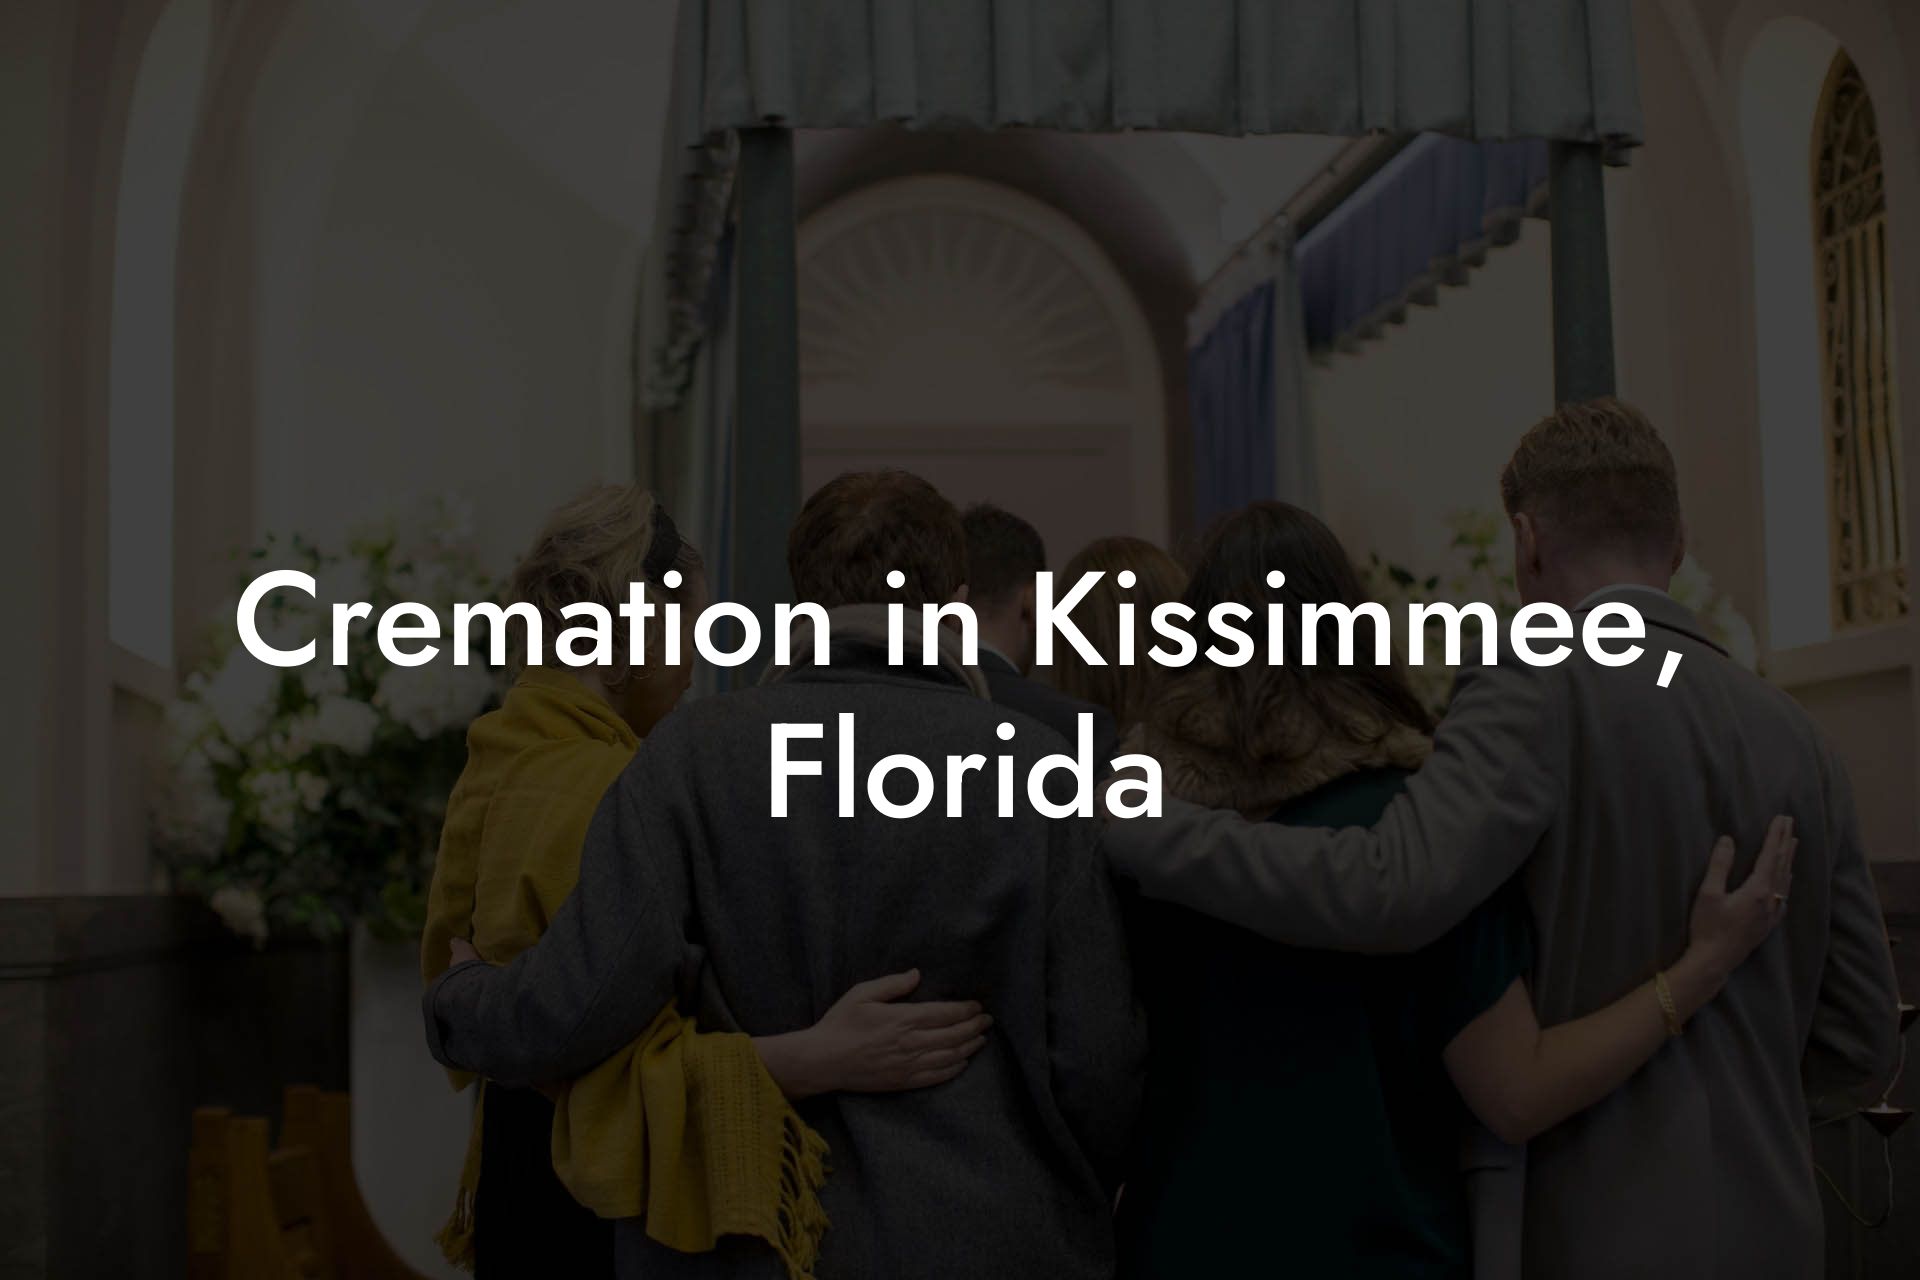 Cremation in Kissimmee, Florida